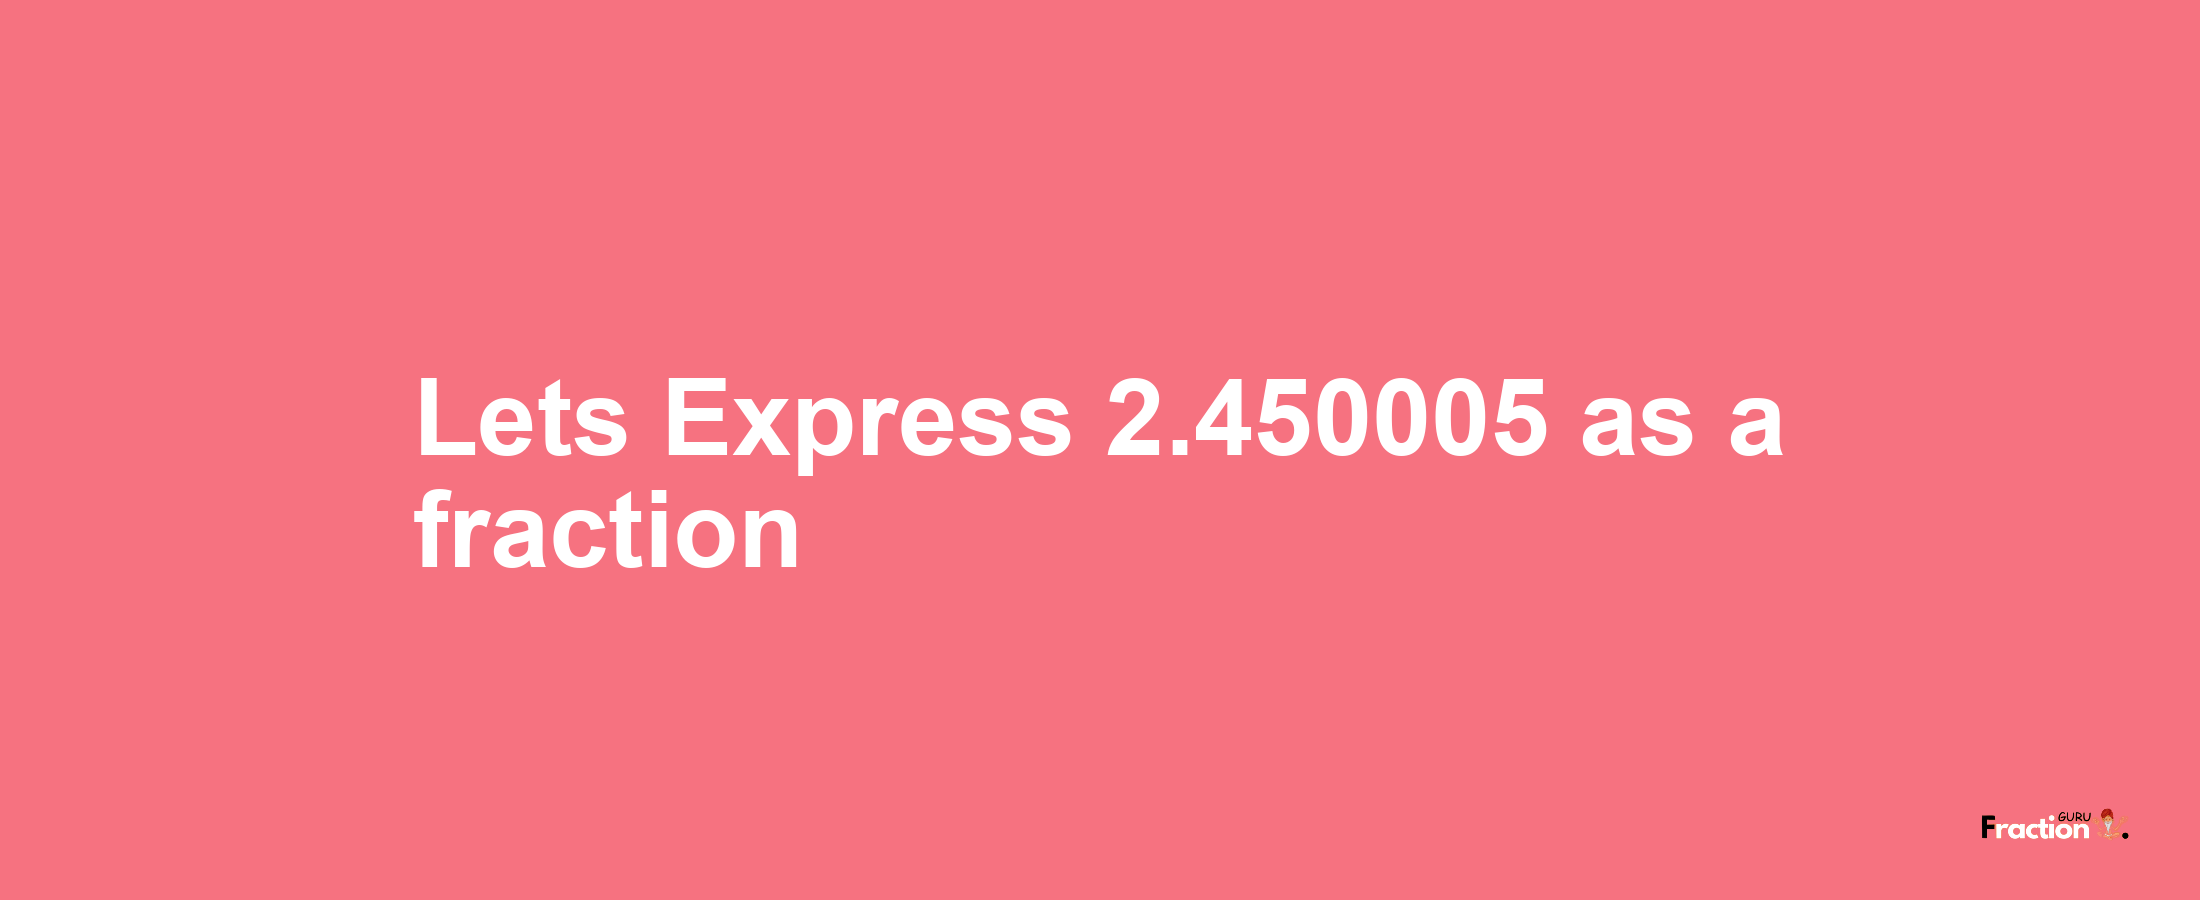 Lets Express 2.450005 as afraction